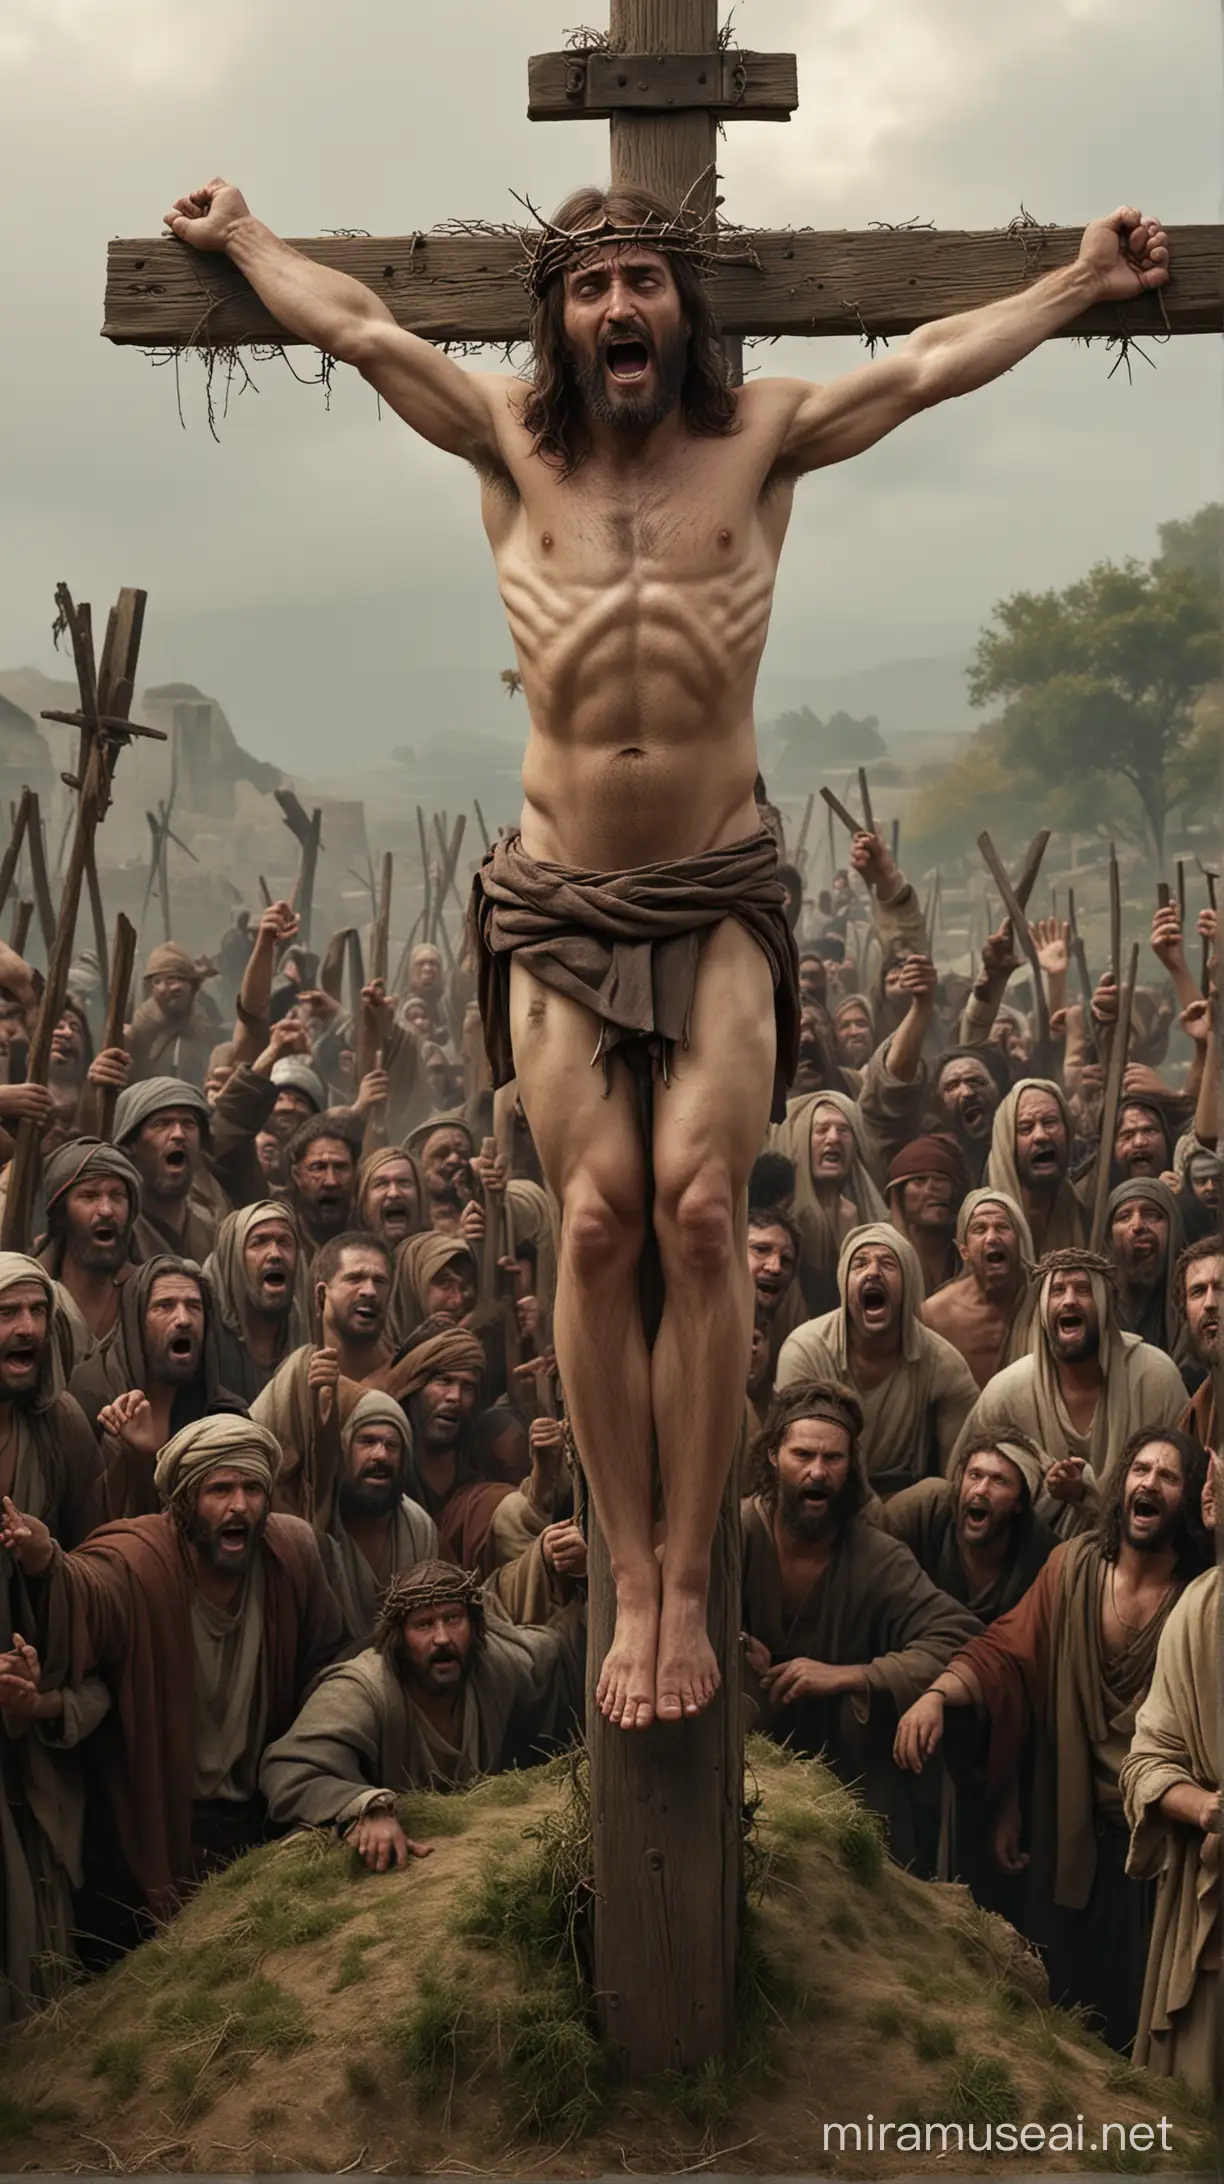 Create an ultra-realistic image of Jesus being crucified, in the  cross, between two bandits. Show details of the people mocking and laughing at him. He has the crown of thorns and the blood on his forehead. To involve the spectator, on stage, to the great significance of that historic day. Show the small nuances and richness of details of the scenery and the people. At nightfall. Image 8k